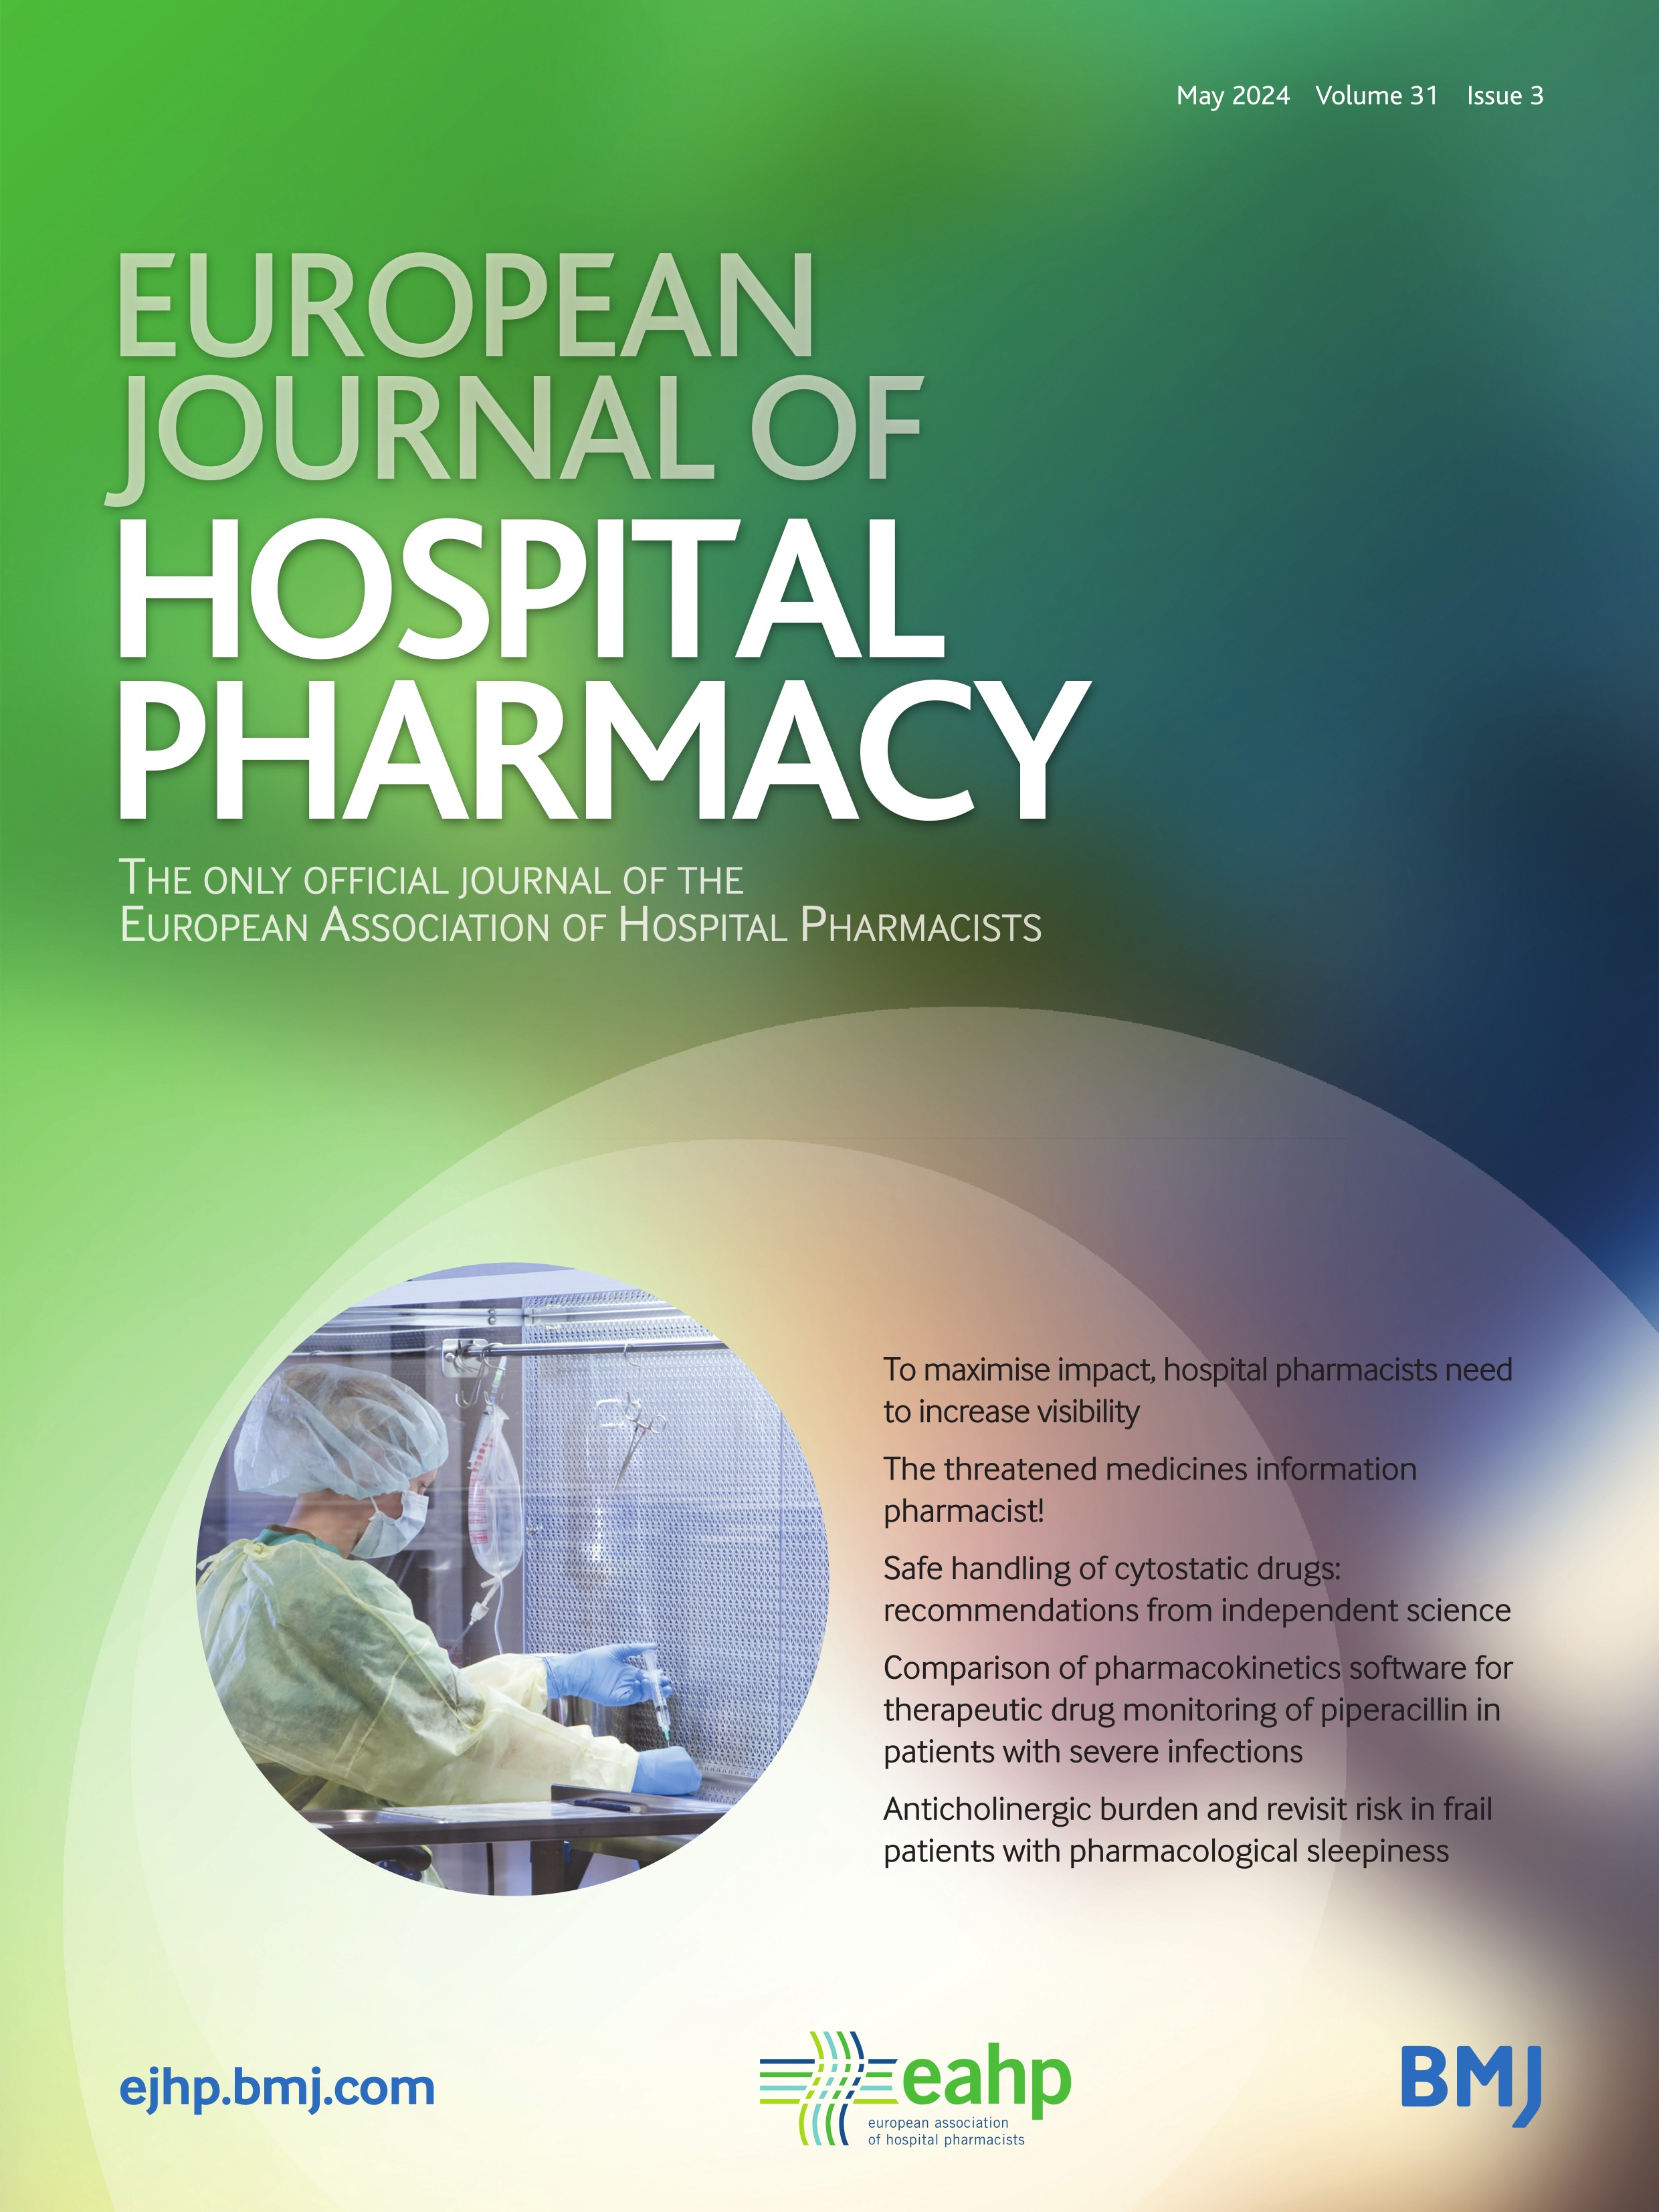 Impact of implementing the aseptic compounding management system, Medcura, on internal error rates within an oncology pharmacy aseptic unit: a mixed methods evaluation